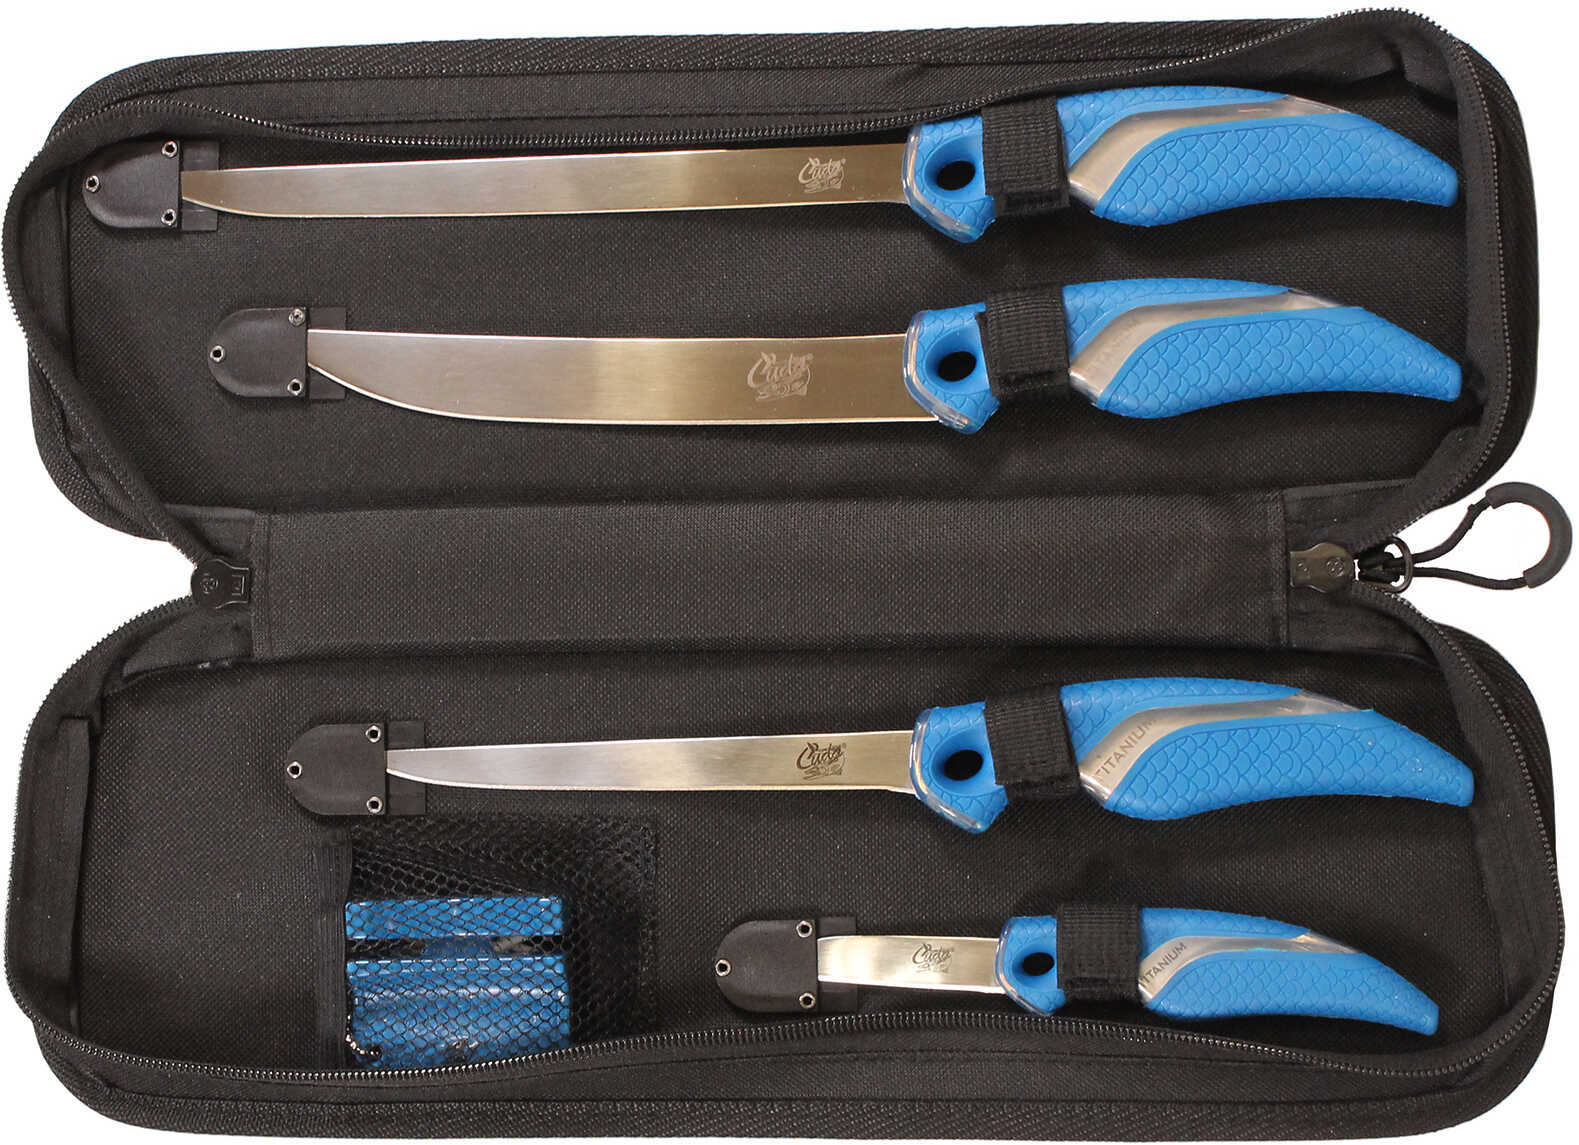 Cuda Brand Fishing Products 6 Piece Fillet Knife Set with Heavy Duty Case